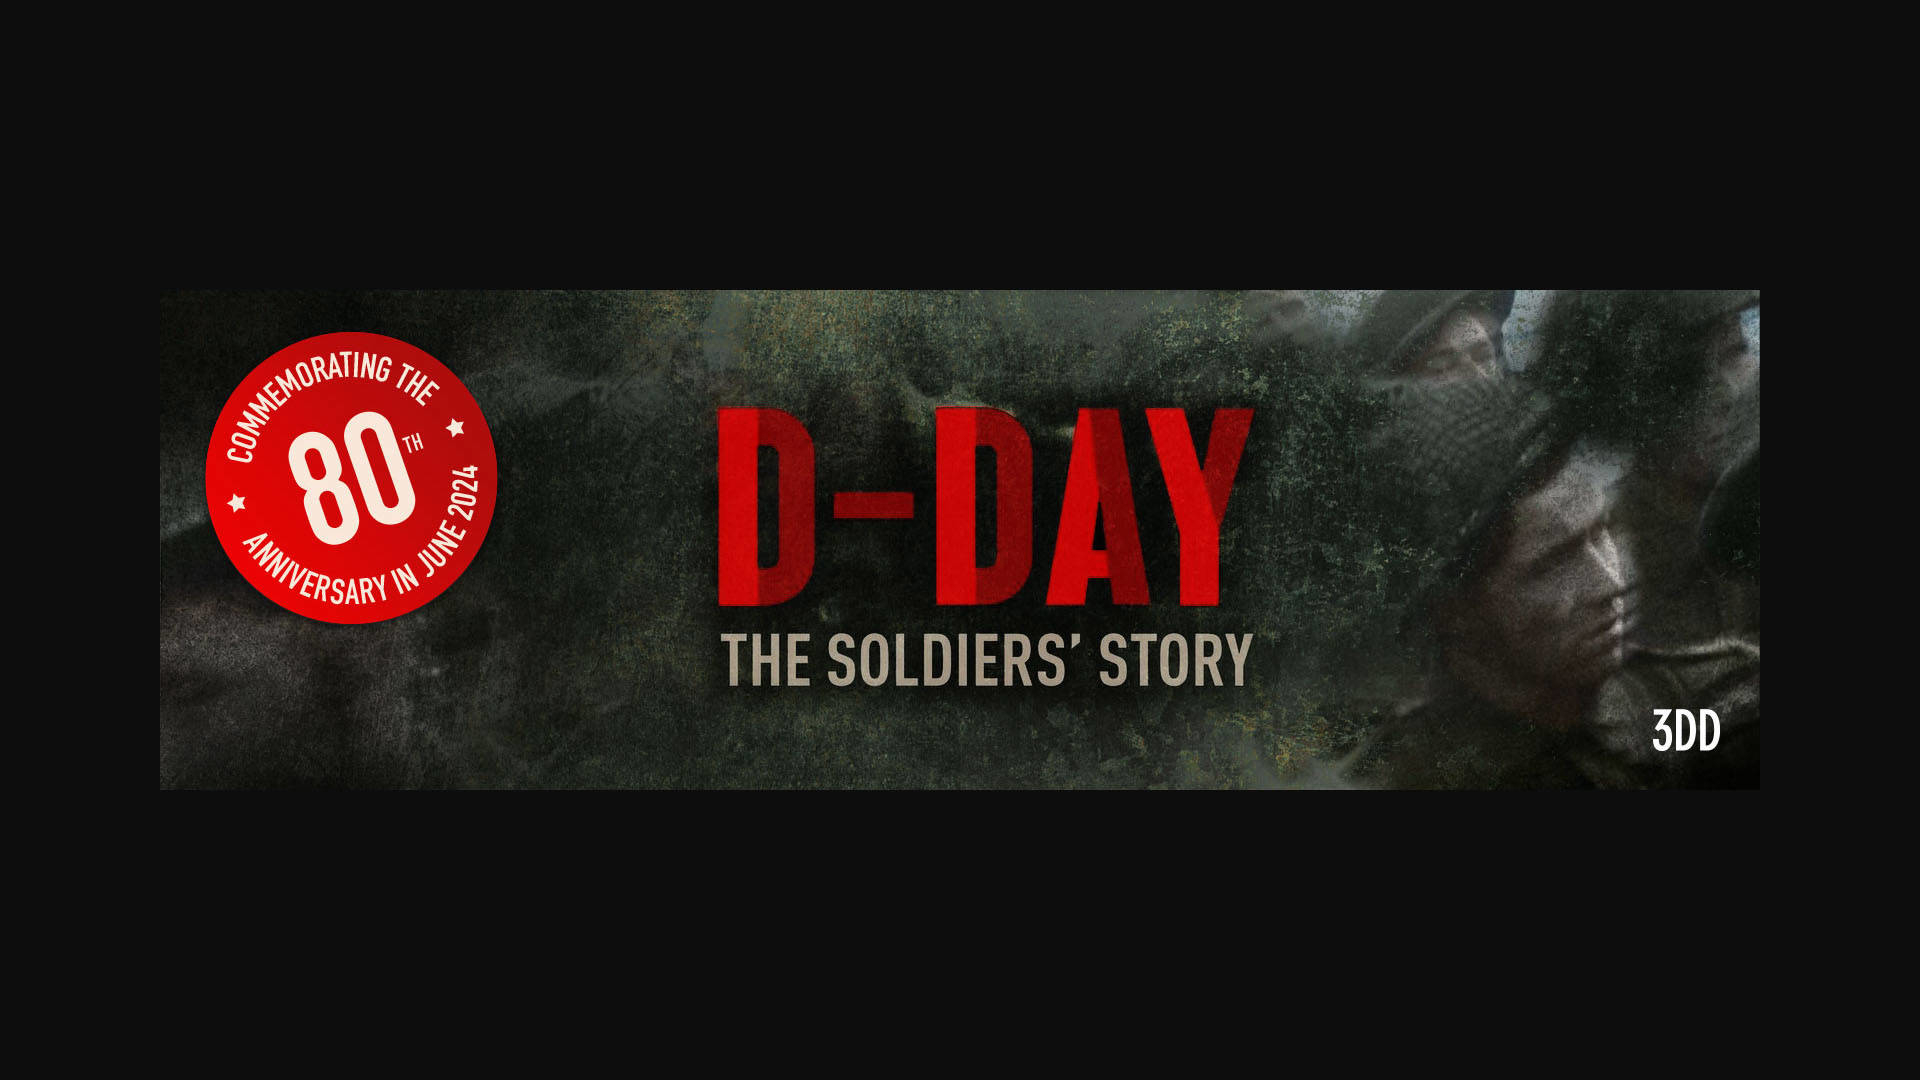 D-DAY The Soldiers' Story